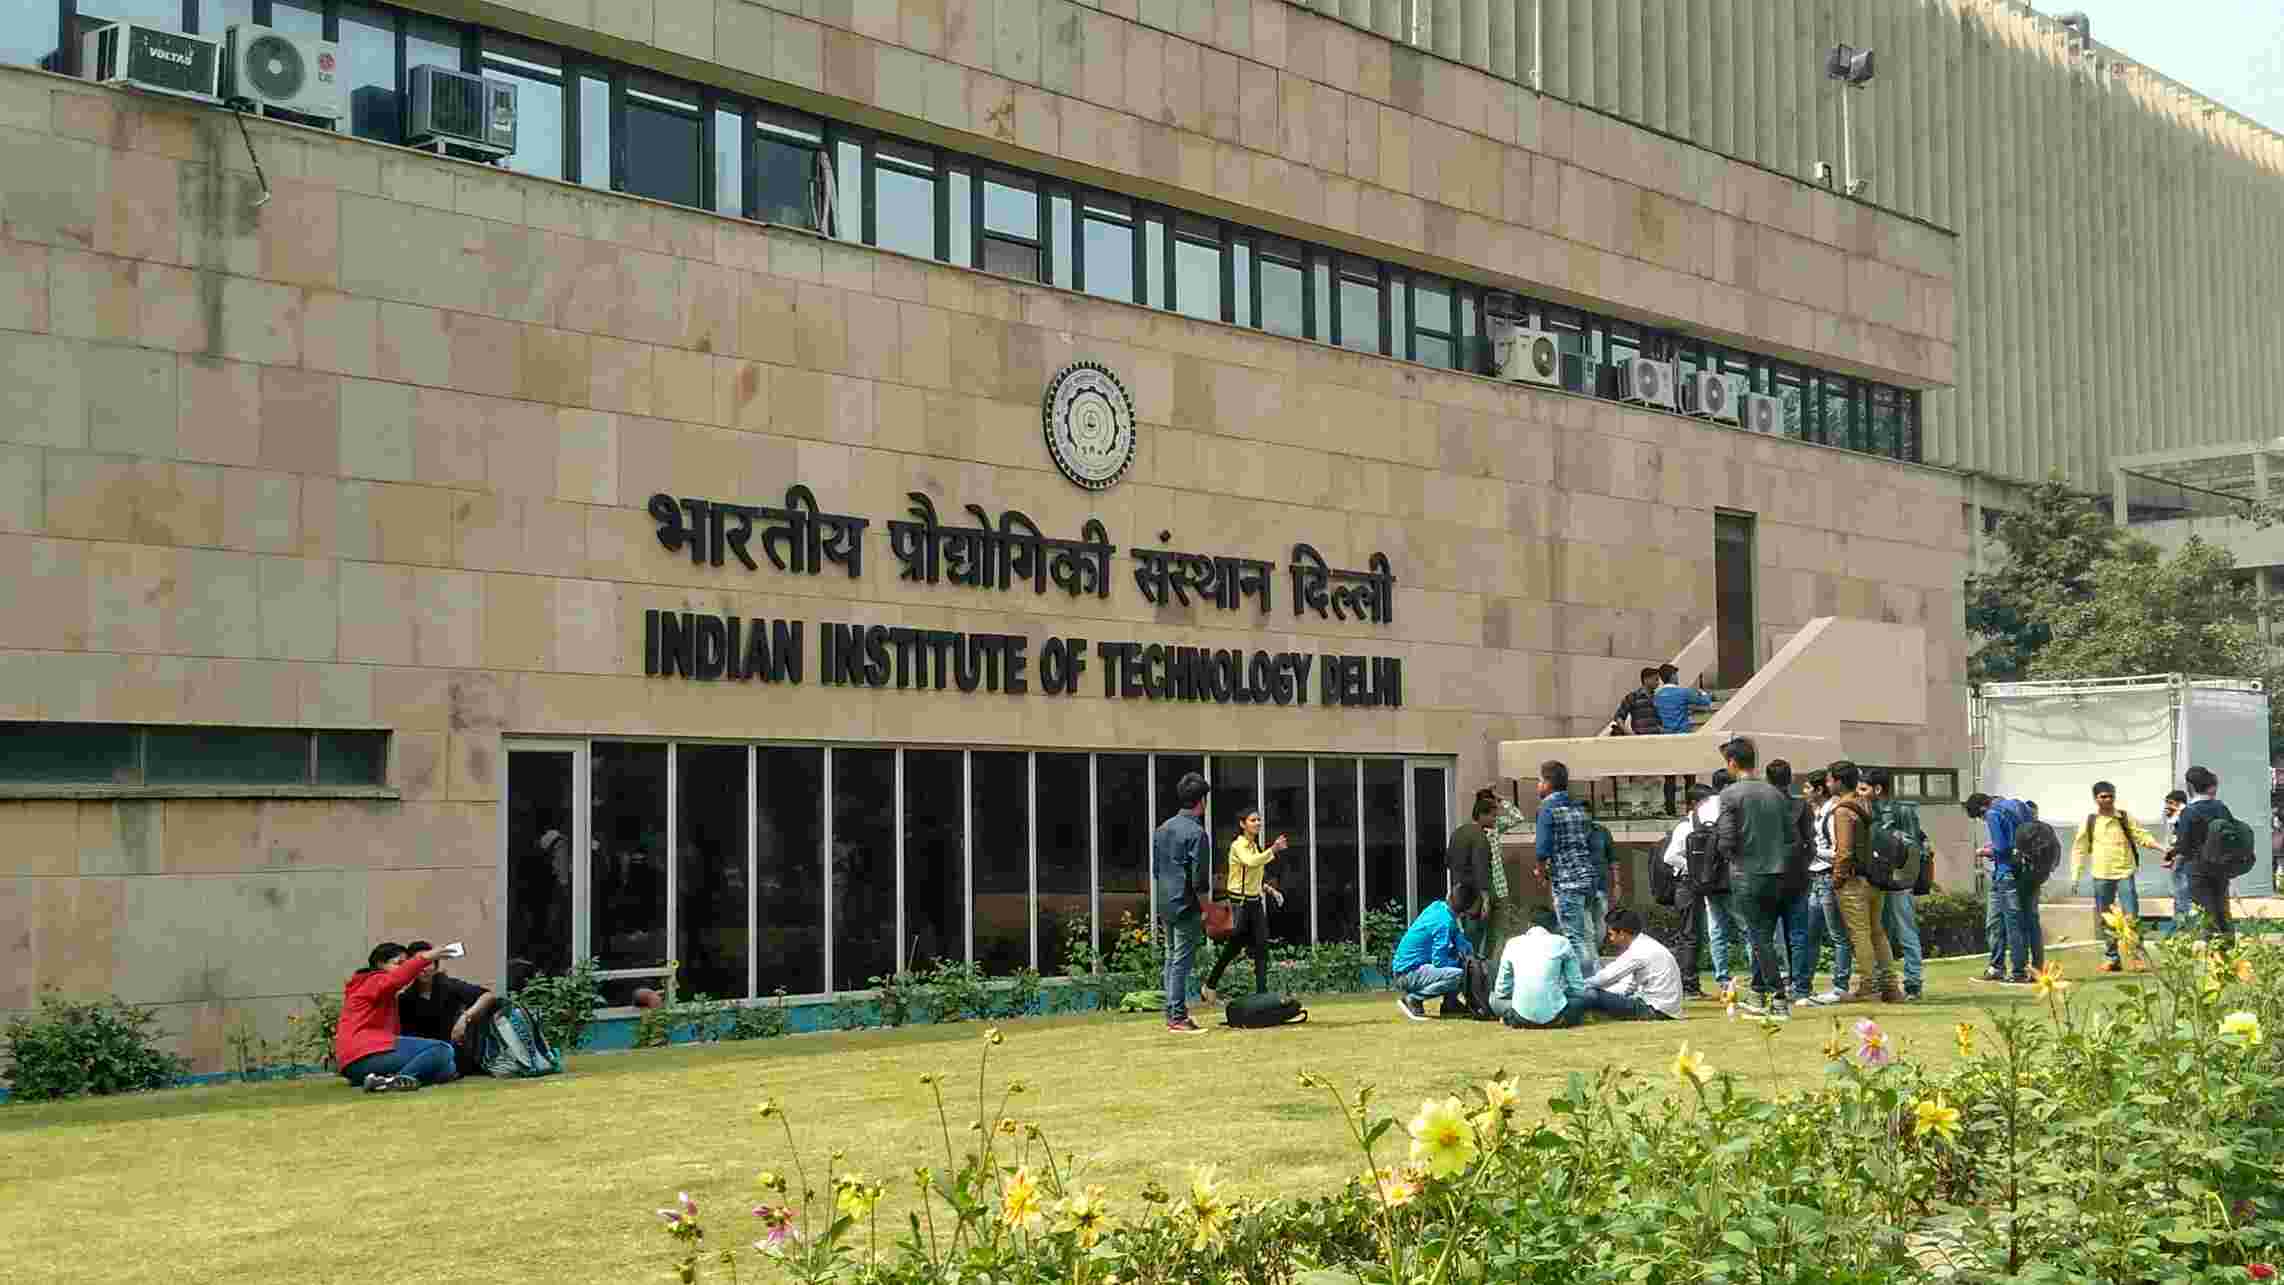 IIT Delhi issued a statement after the silent protest staged by the students on the campus against the "recent fee hikes"